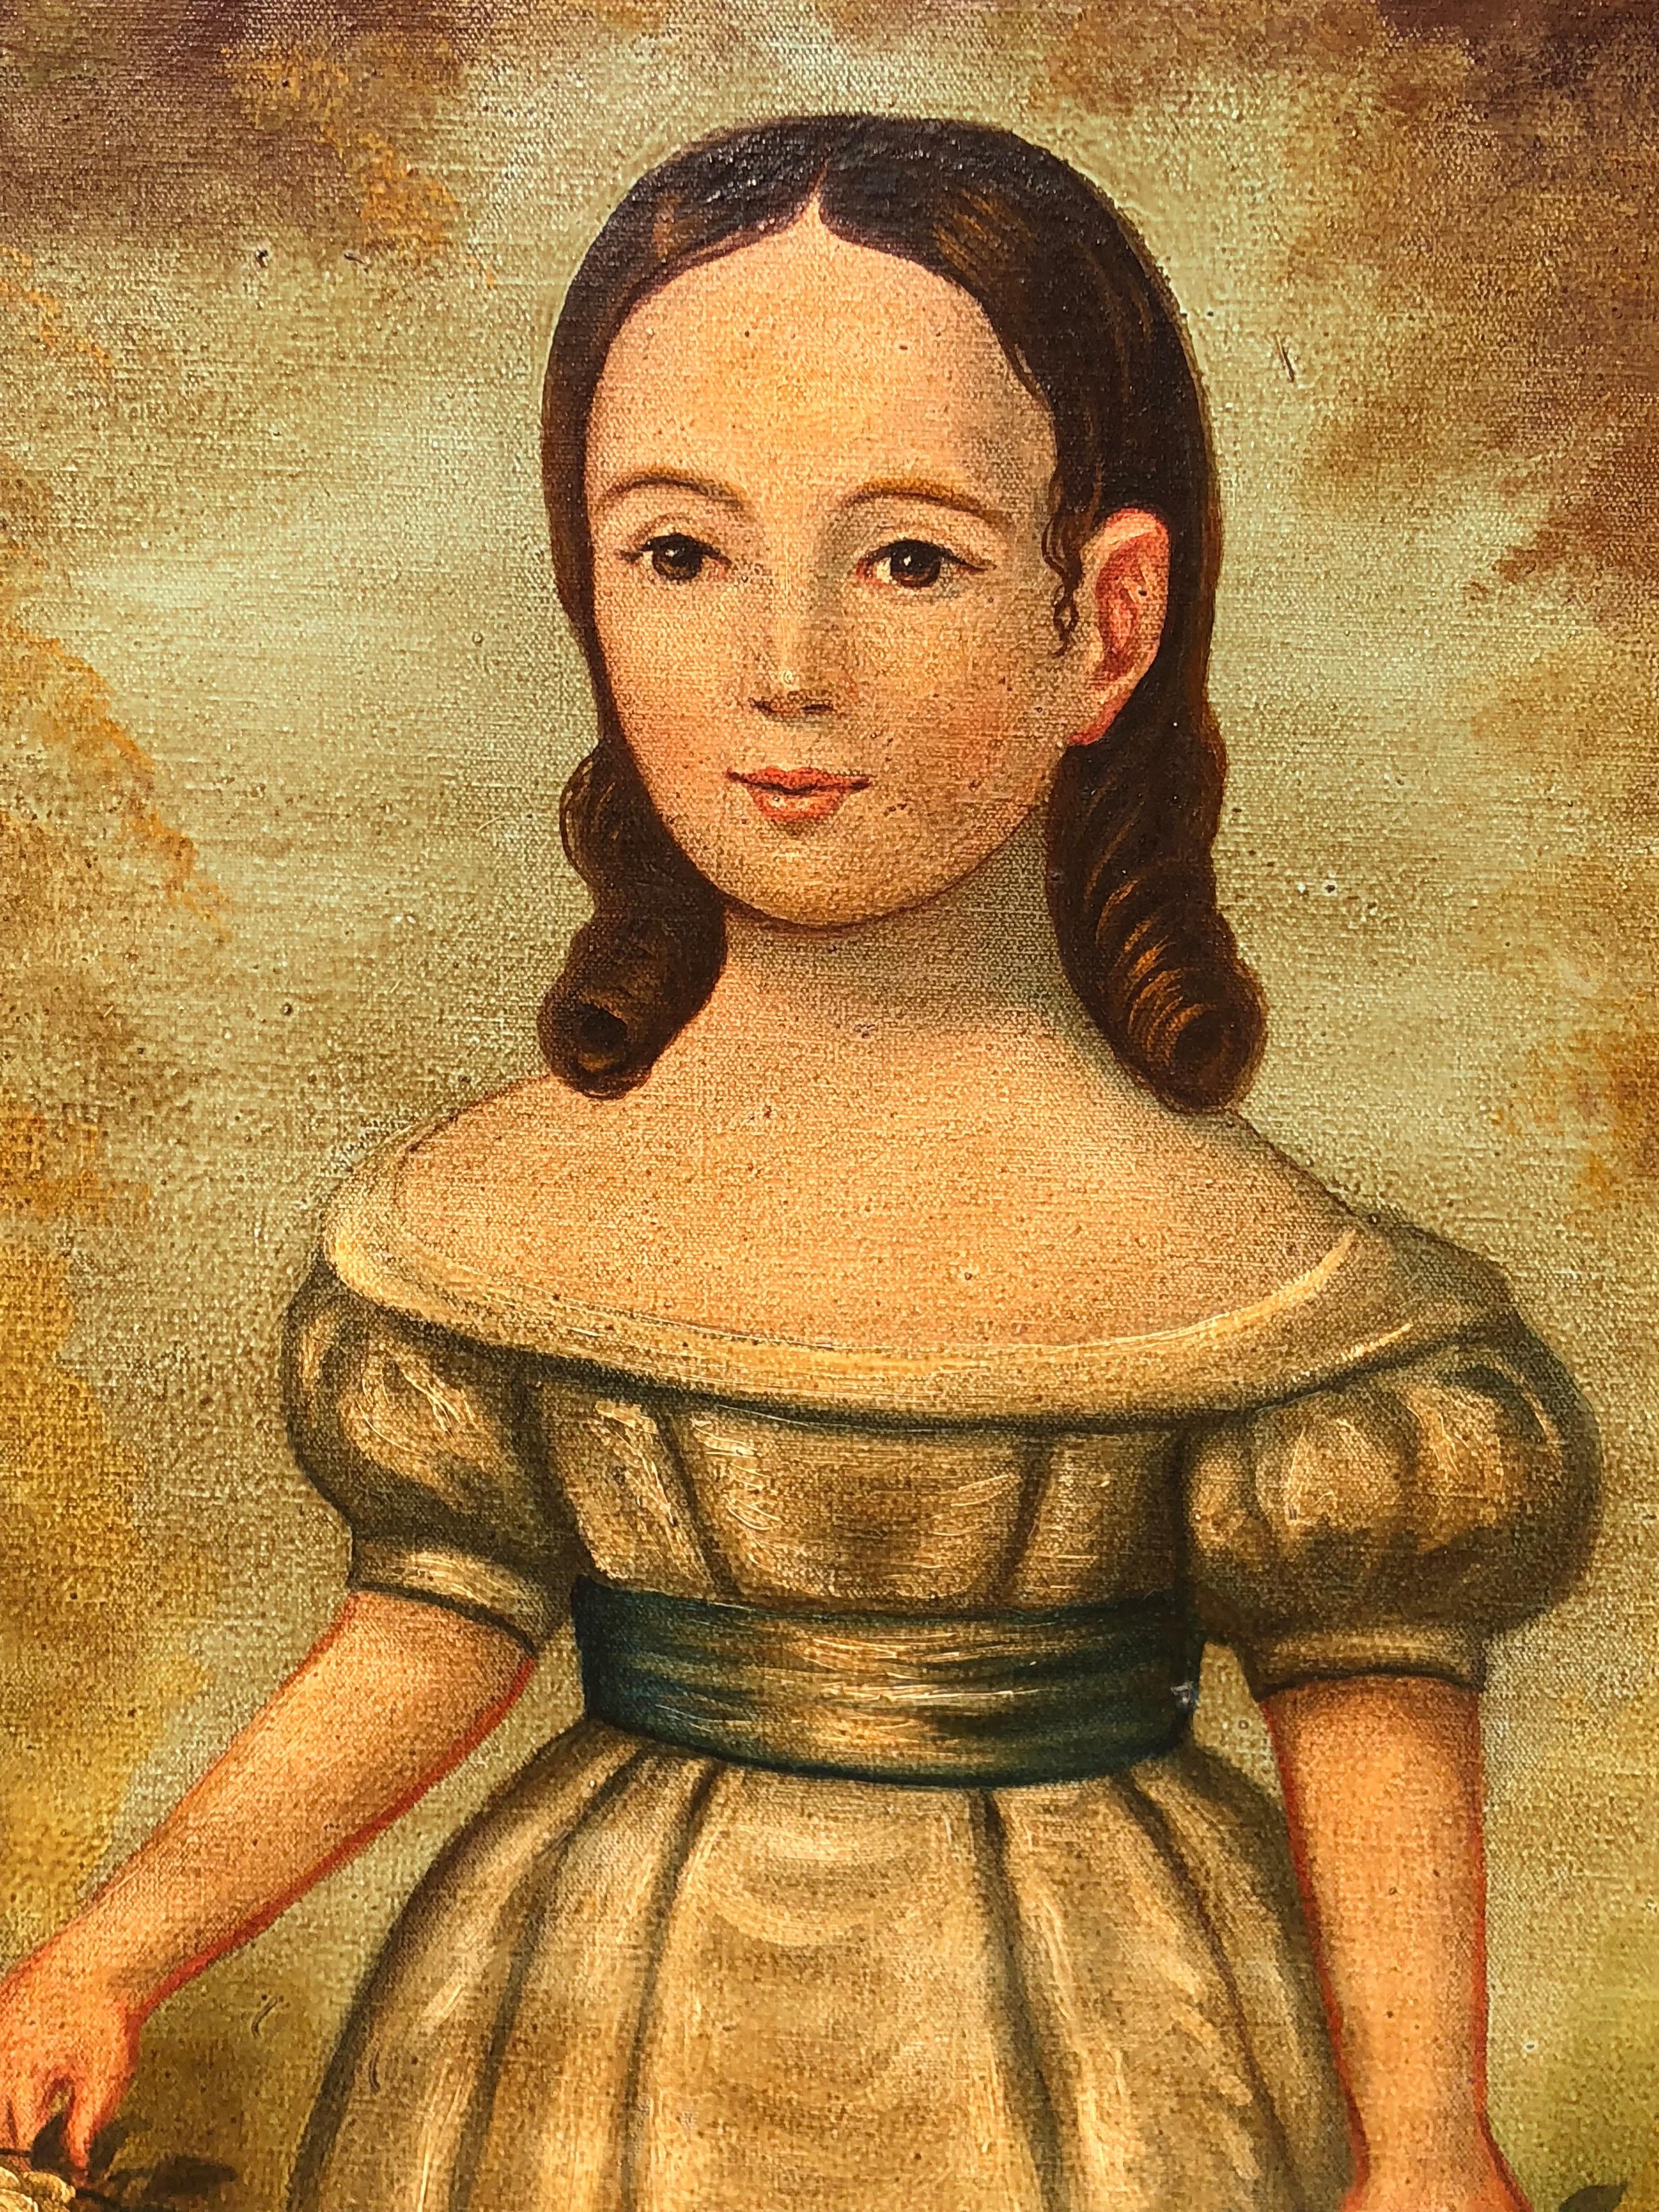 19th century antique Folk Art O/C portrait painting young girl standing, circa 1850.